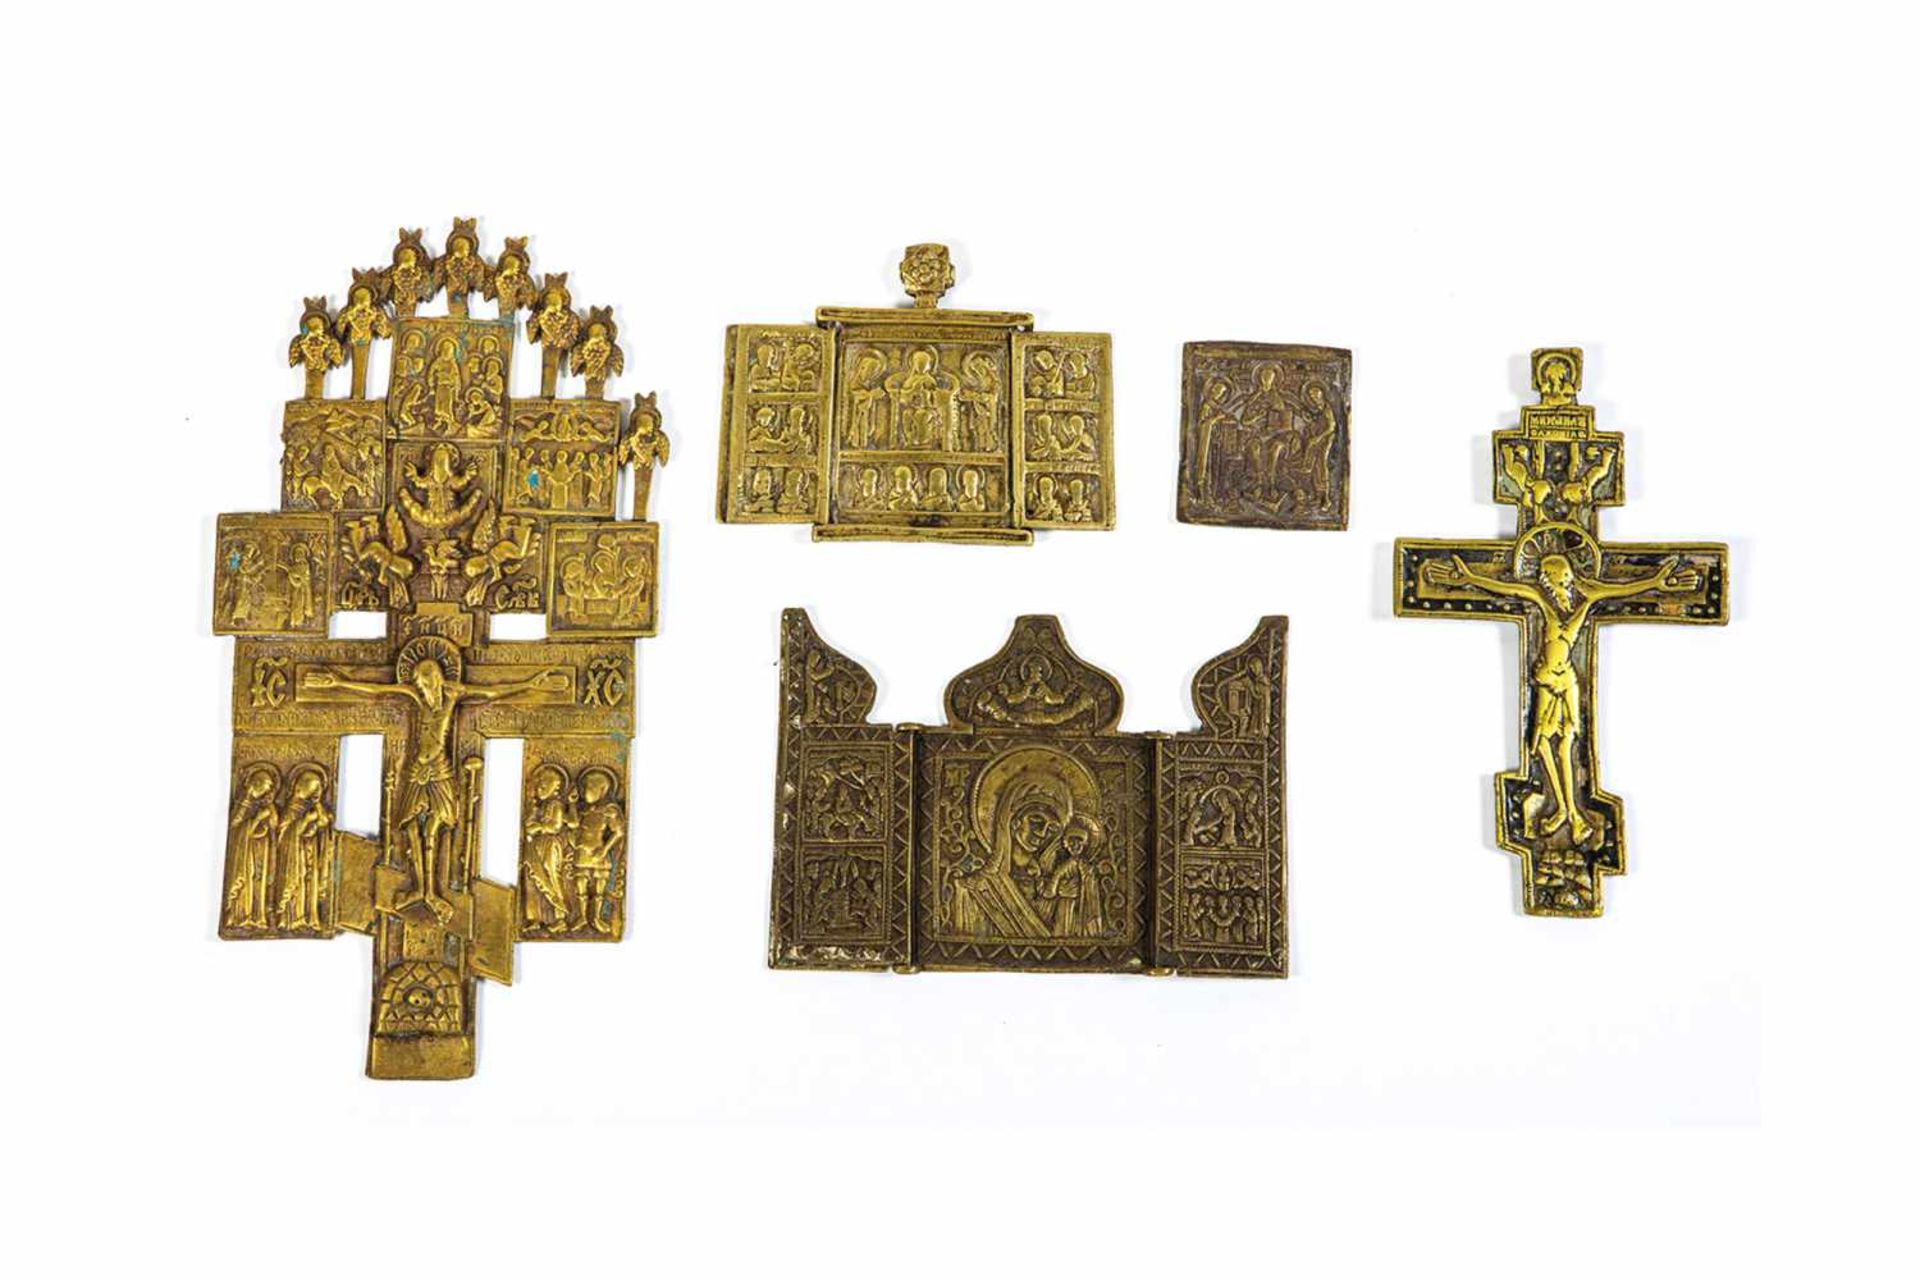 Five brass icons. Russia, 18th/19th century. Cast in relief. Three gilded, two withpolychrome